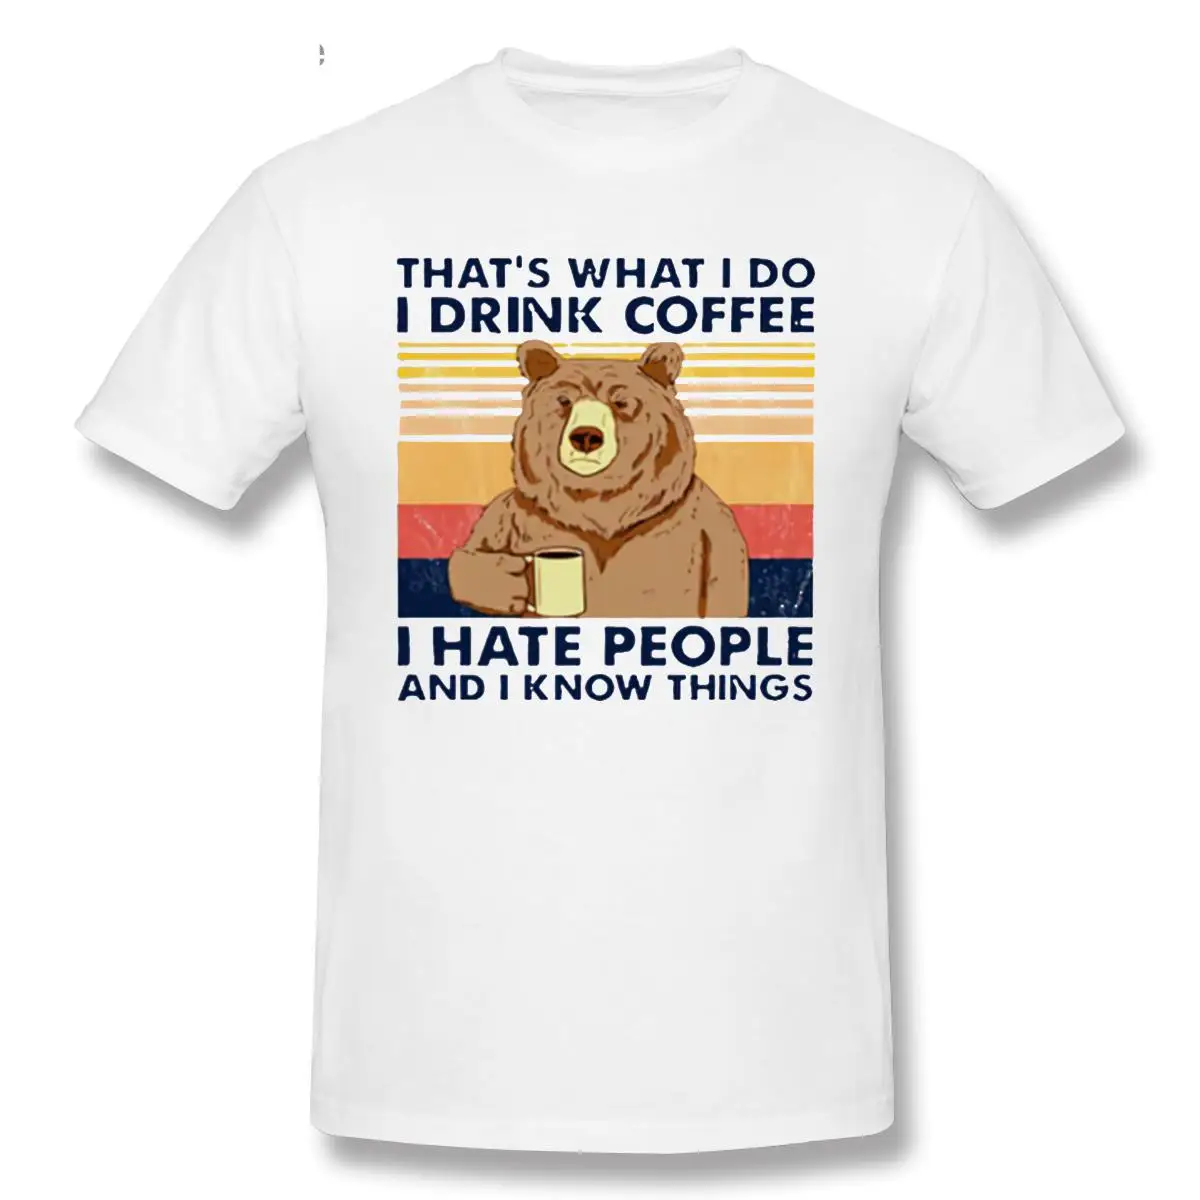 

This is what I drink coffee, hate people and I know vintage t-shirt funny bear t-shirt 100% cotton t-shirt top